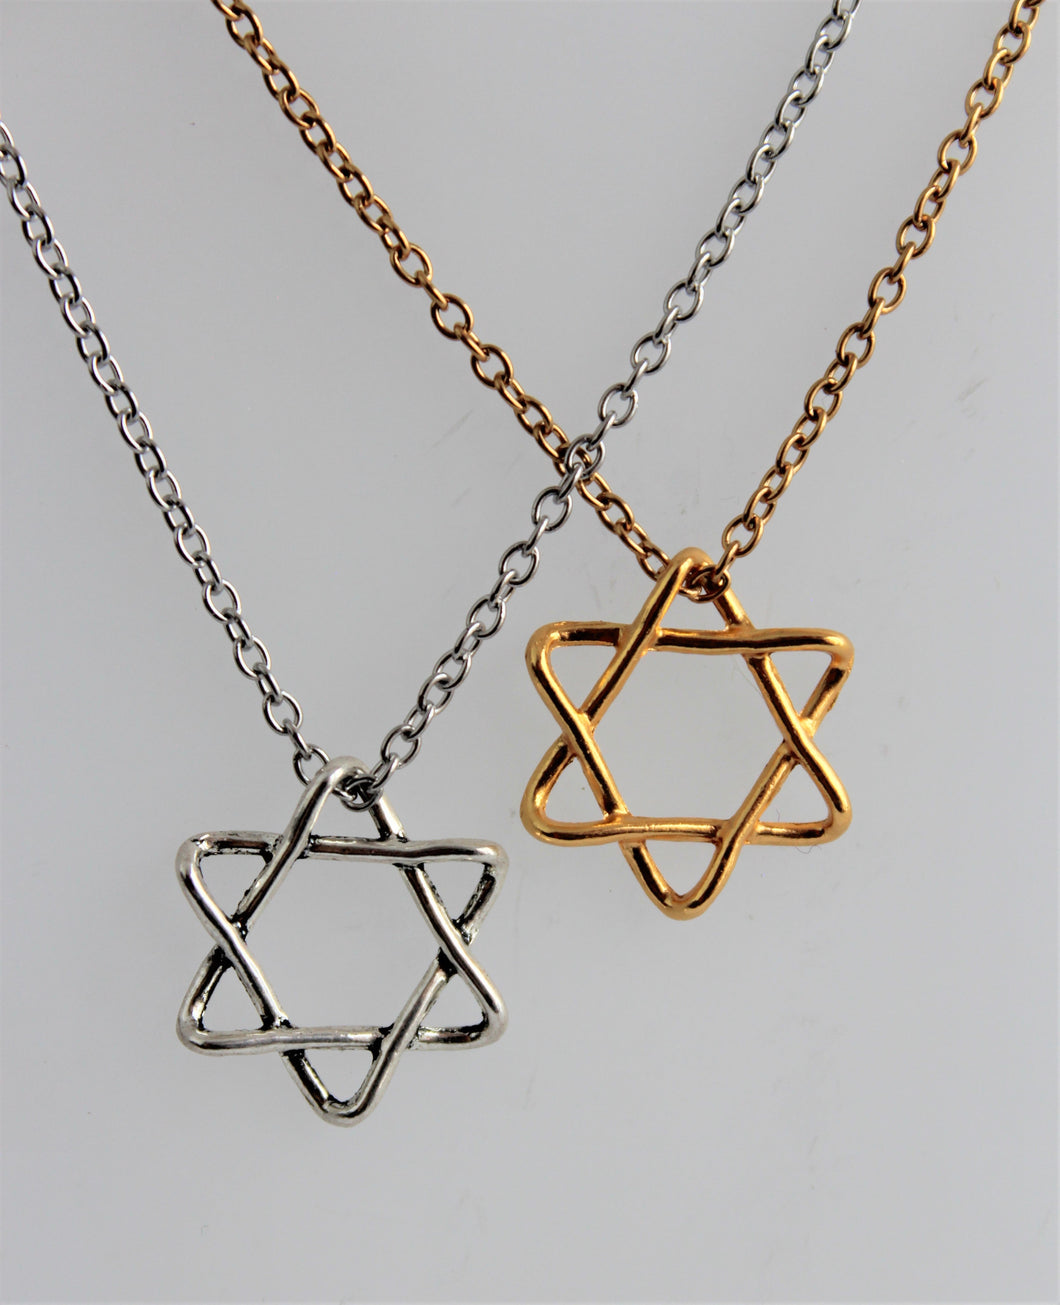 Intertwined Star of David Necklace